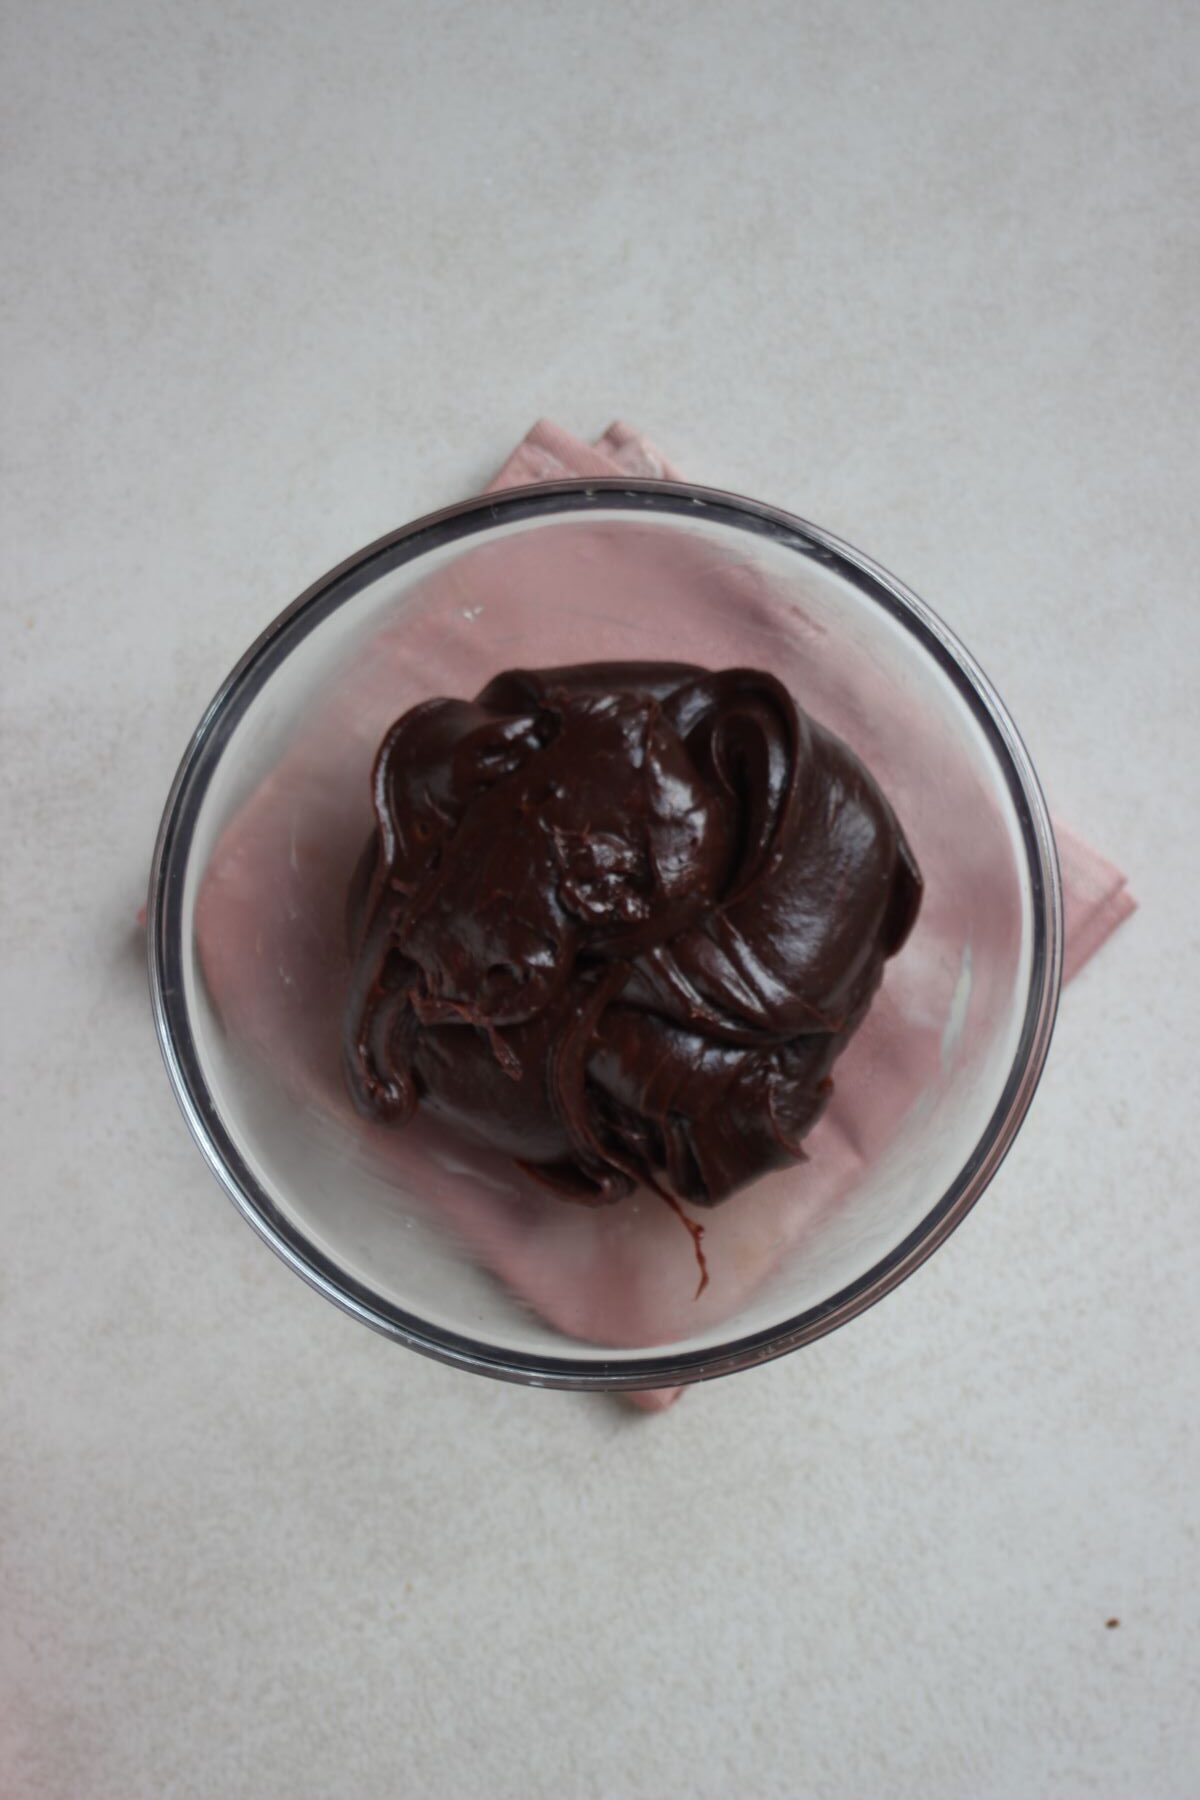 Glass bowl with a big chocolate ball. Pink napkin under the bowl.